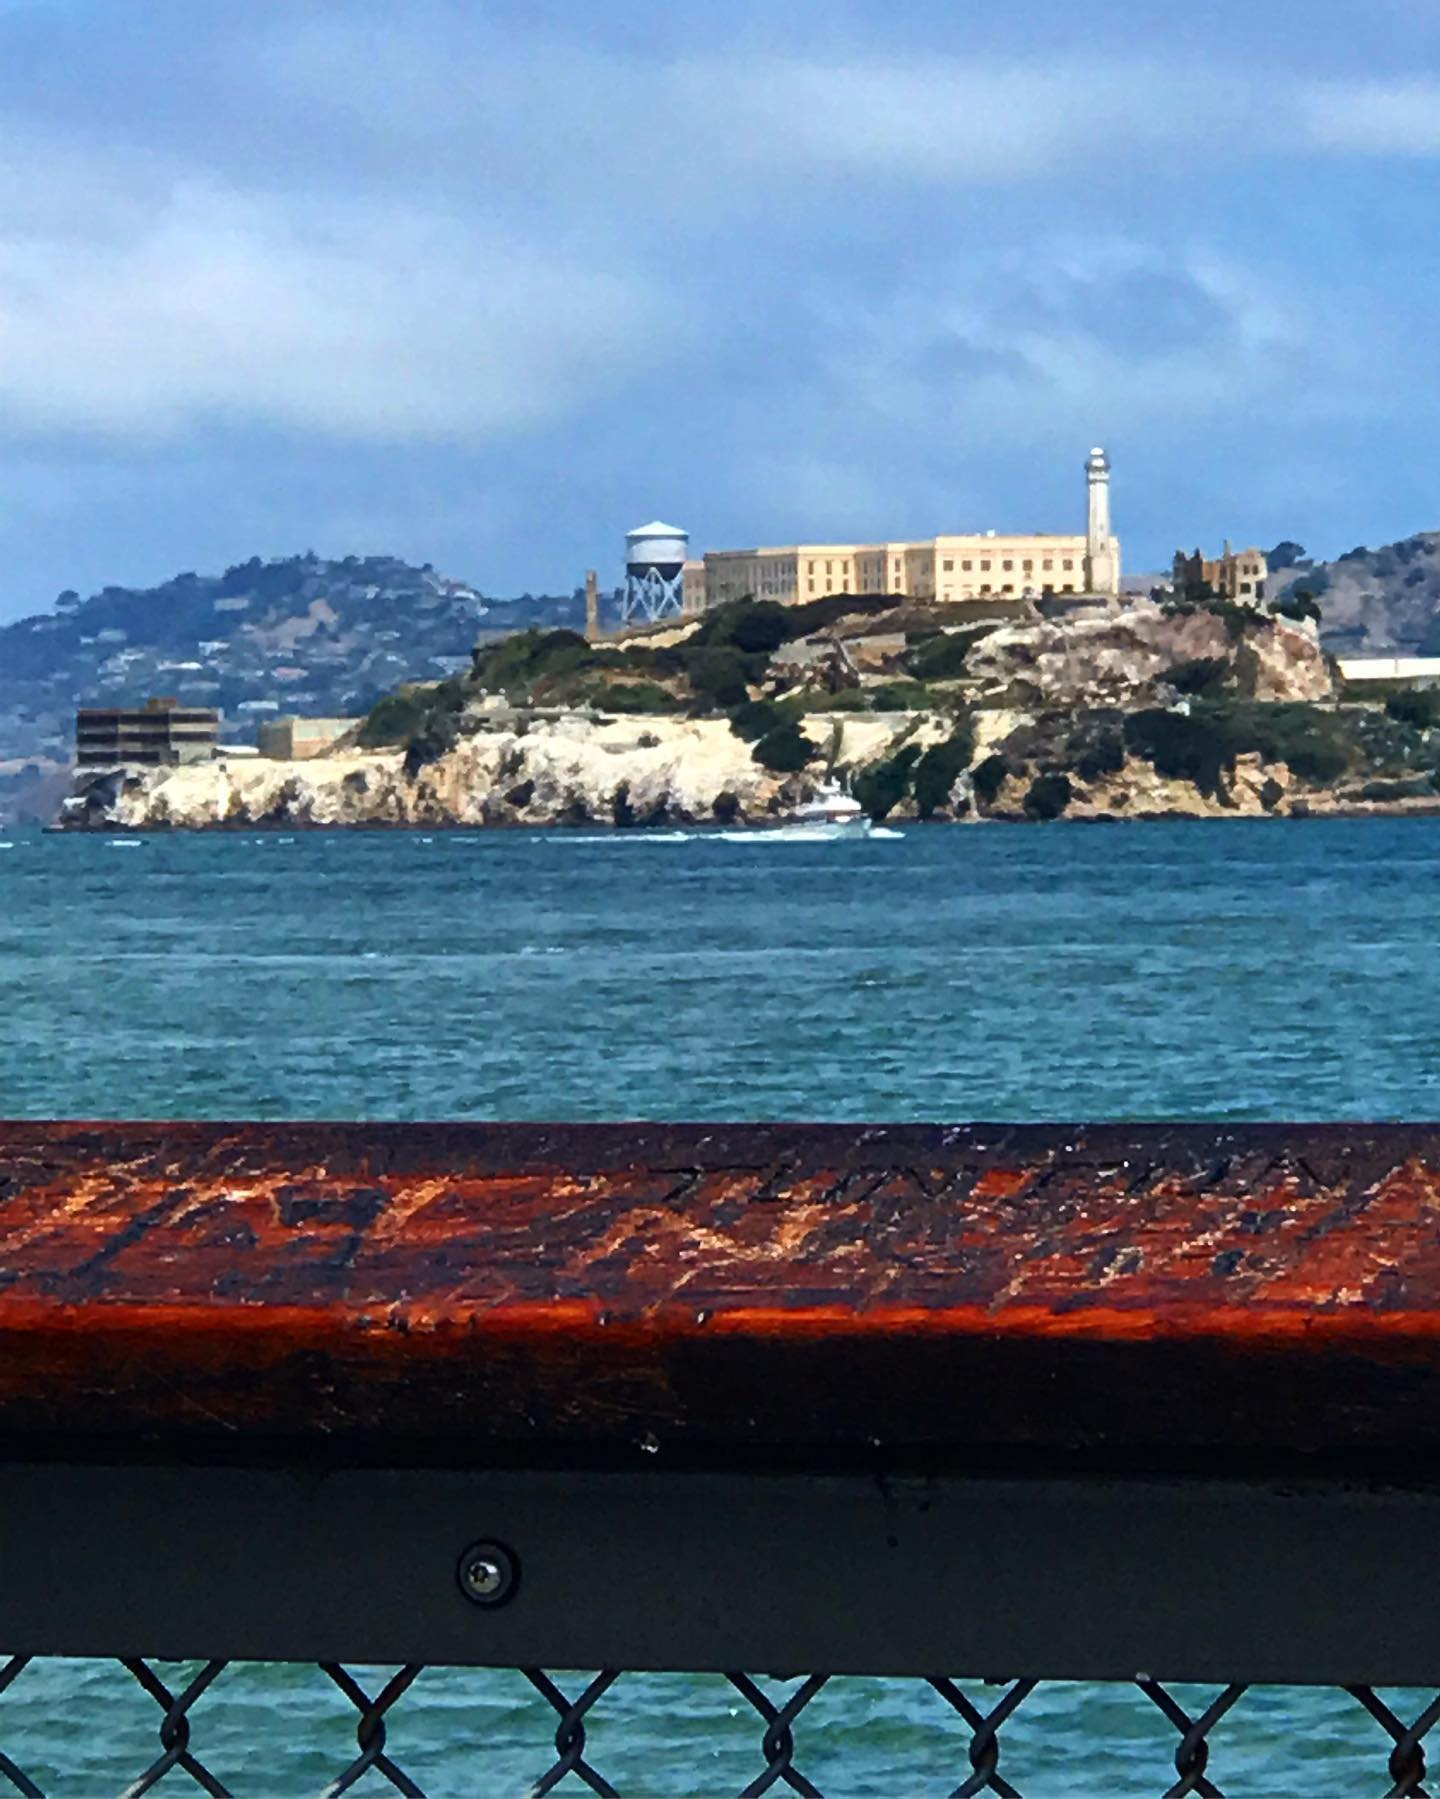 nice day to sit on a park bench and look at Alcatraz.